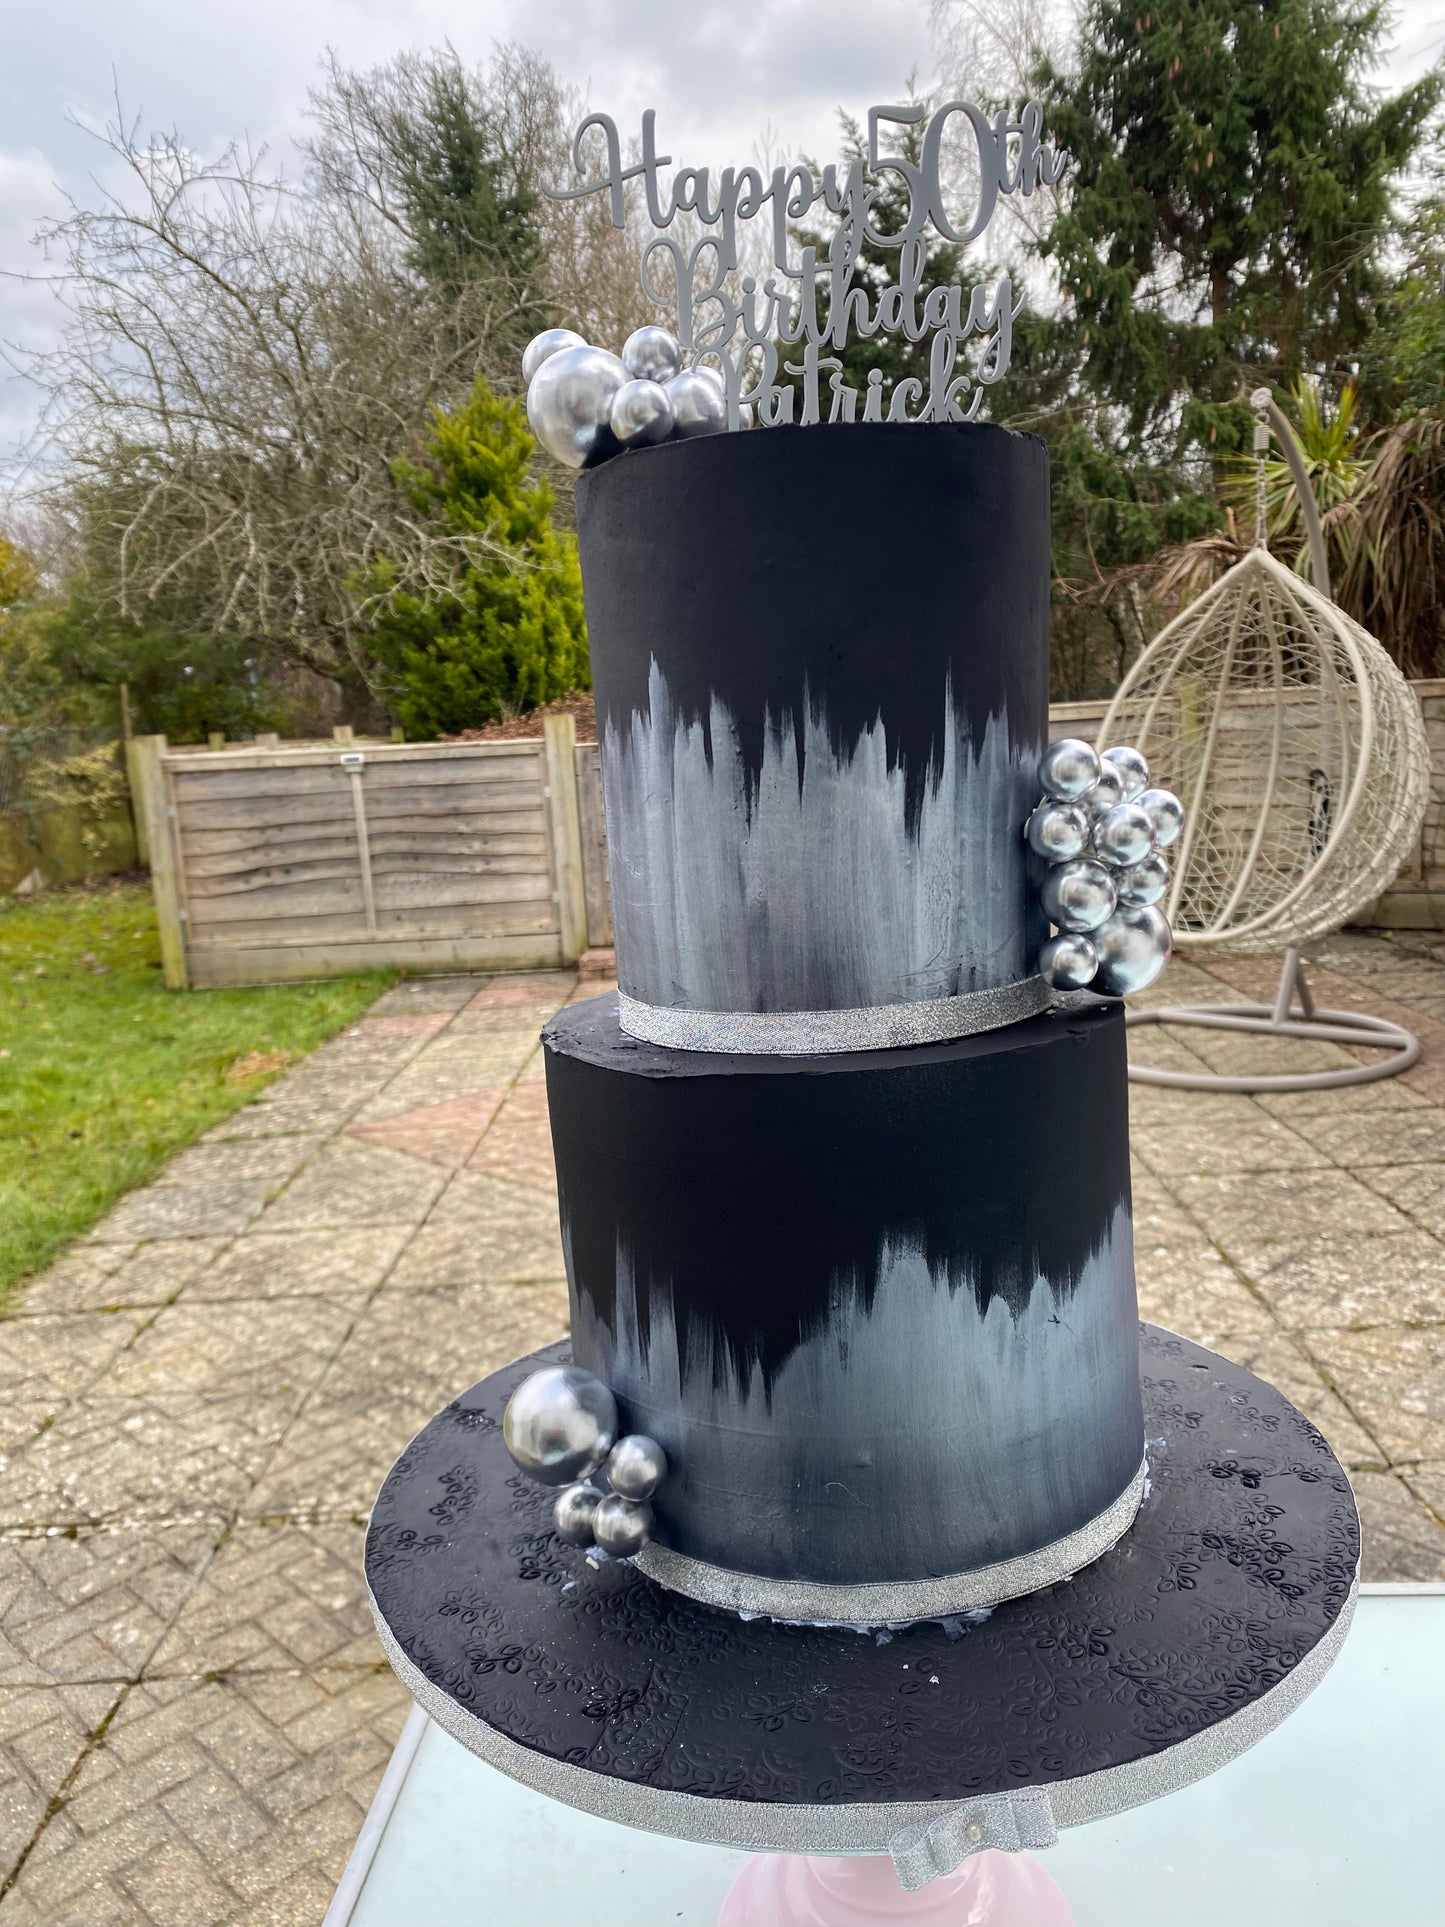 Black cake with silver accents